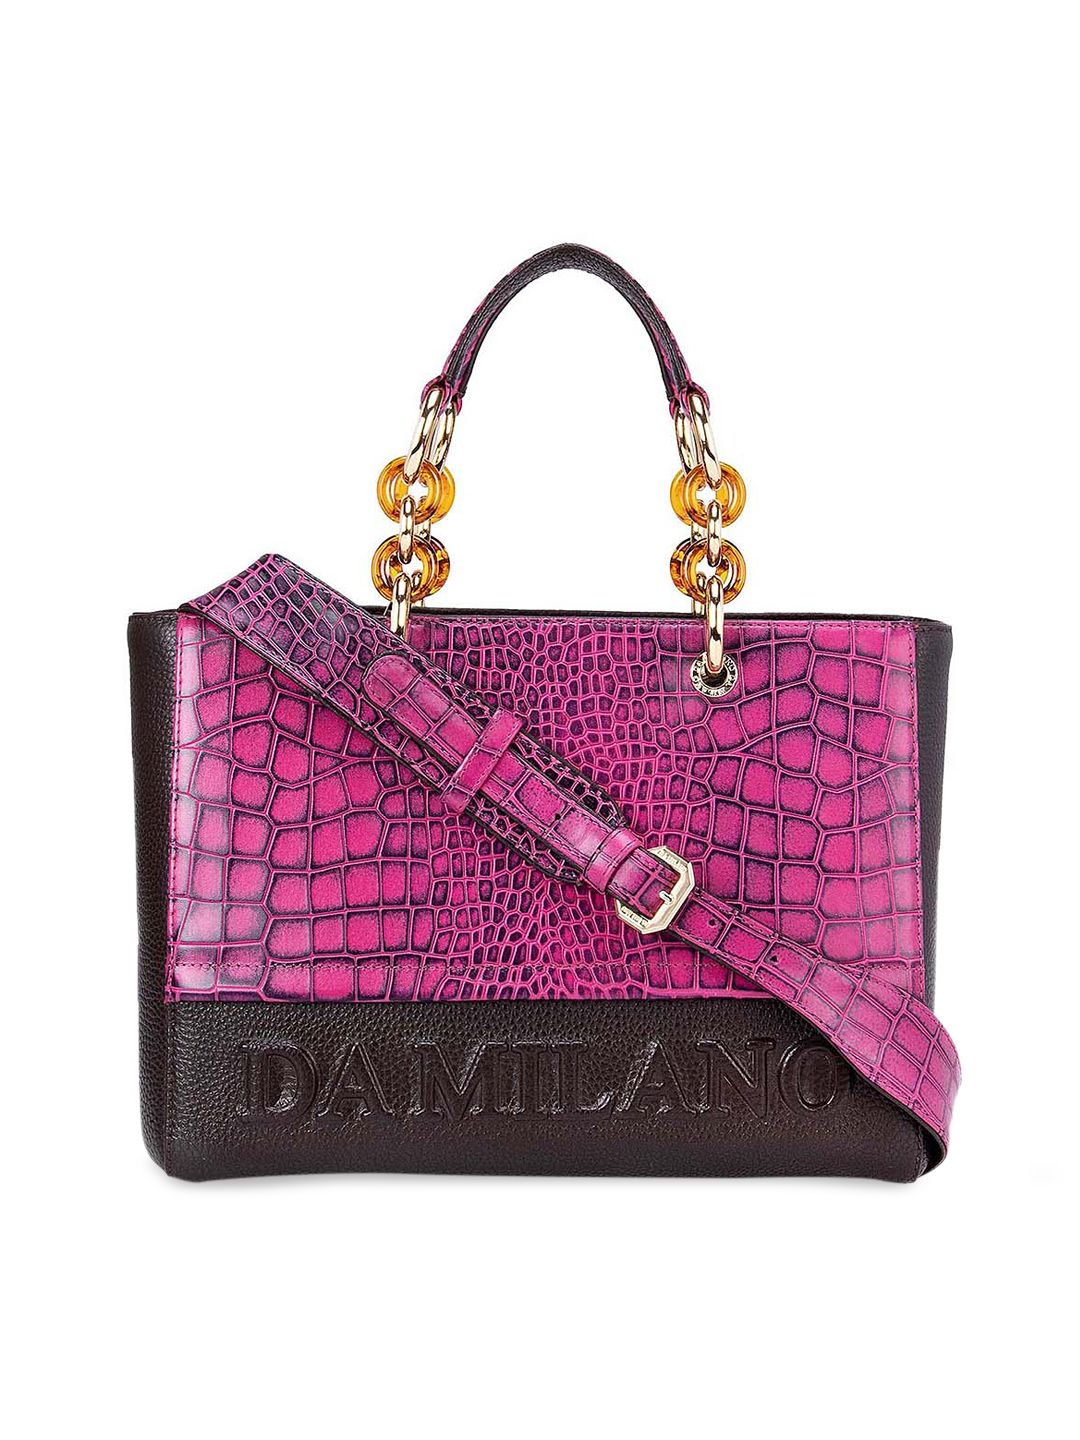 Da Milano Pink Textured Leather Structured Handheld Bag Price in India